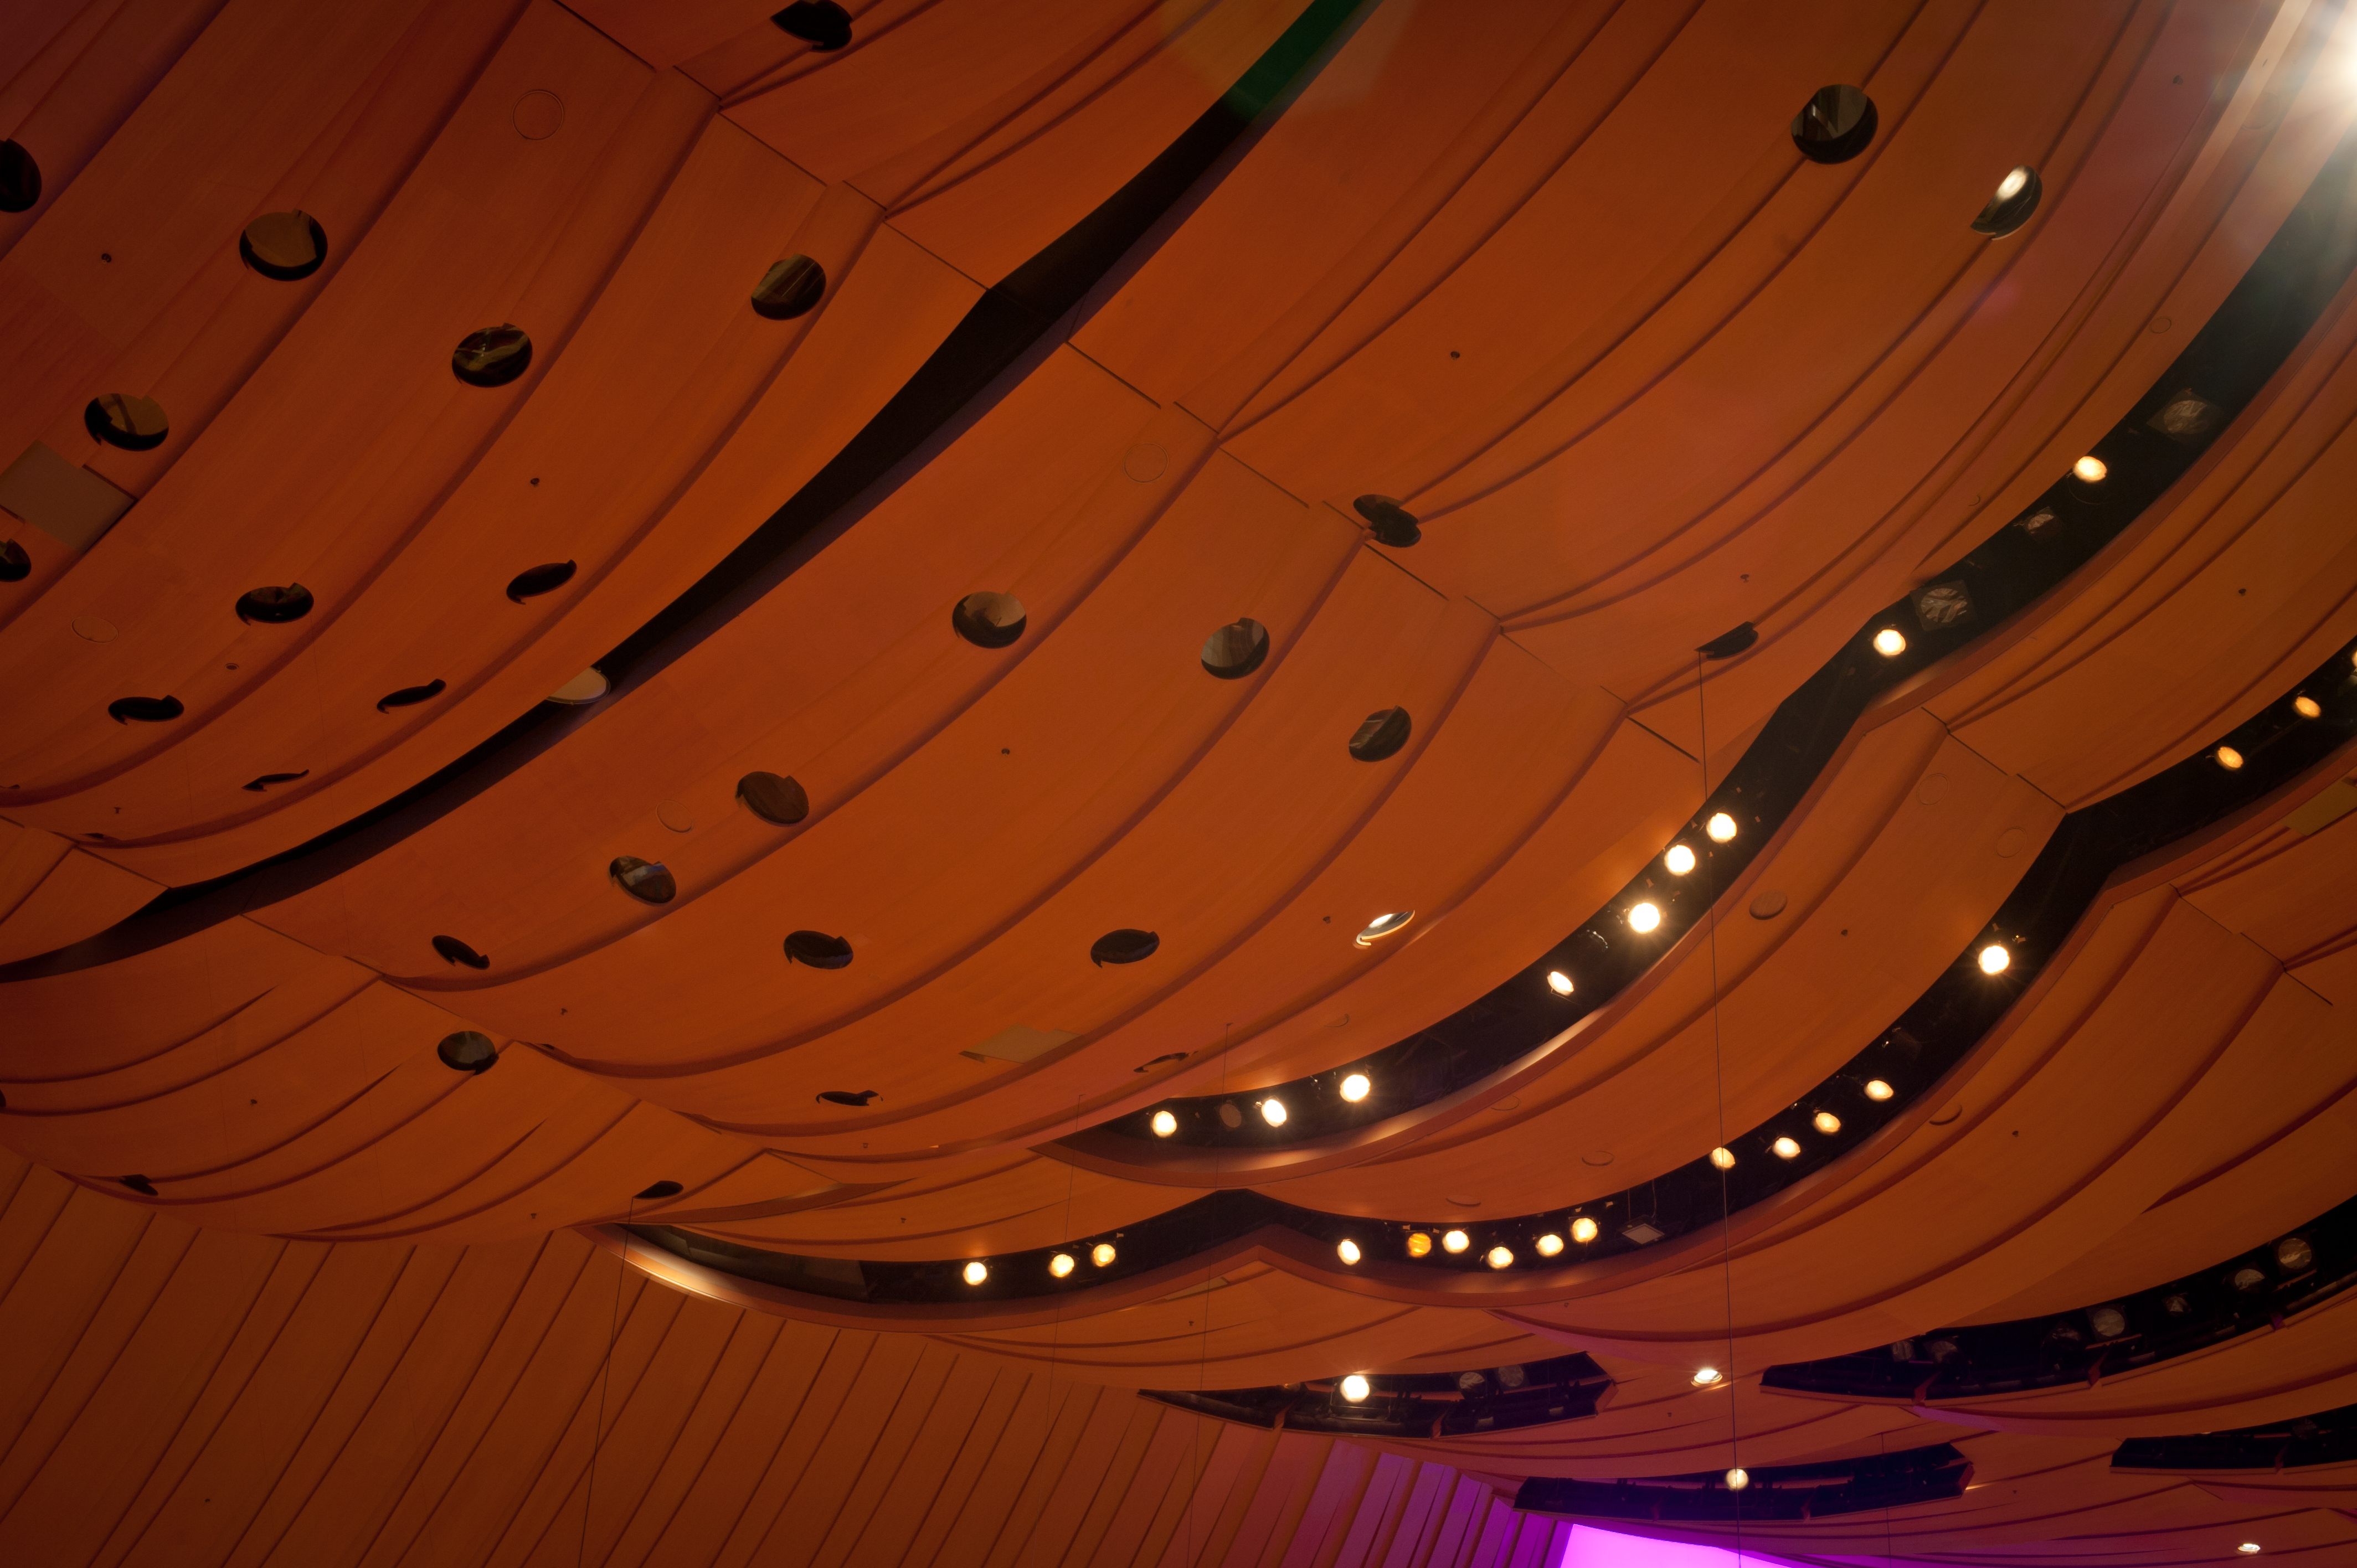 Walt Disney Concert Hall auditorium ceiling with the ribbon effect to help with acoustics